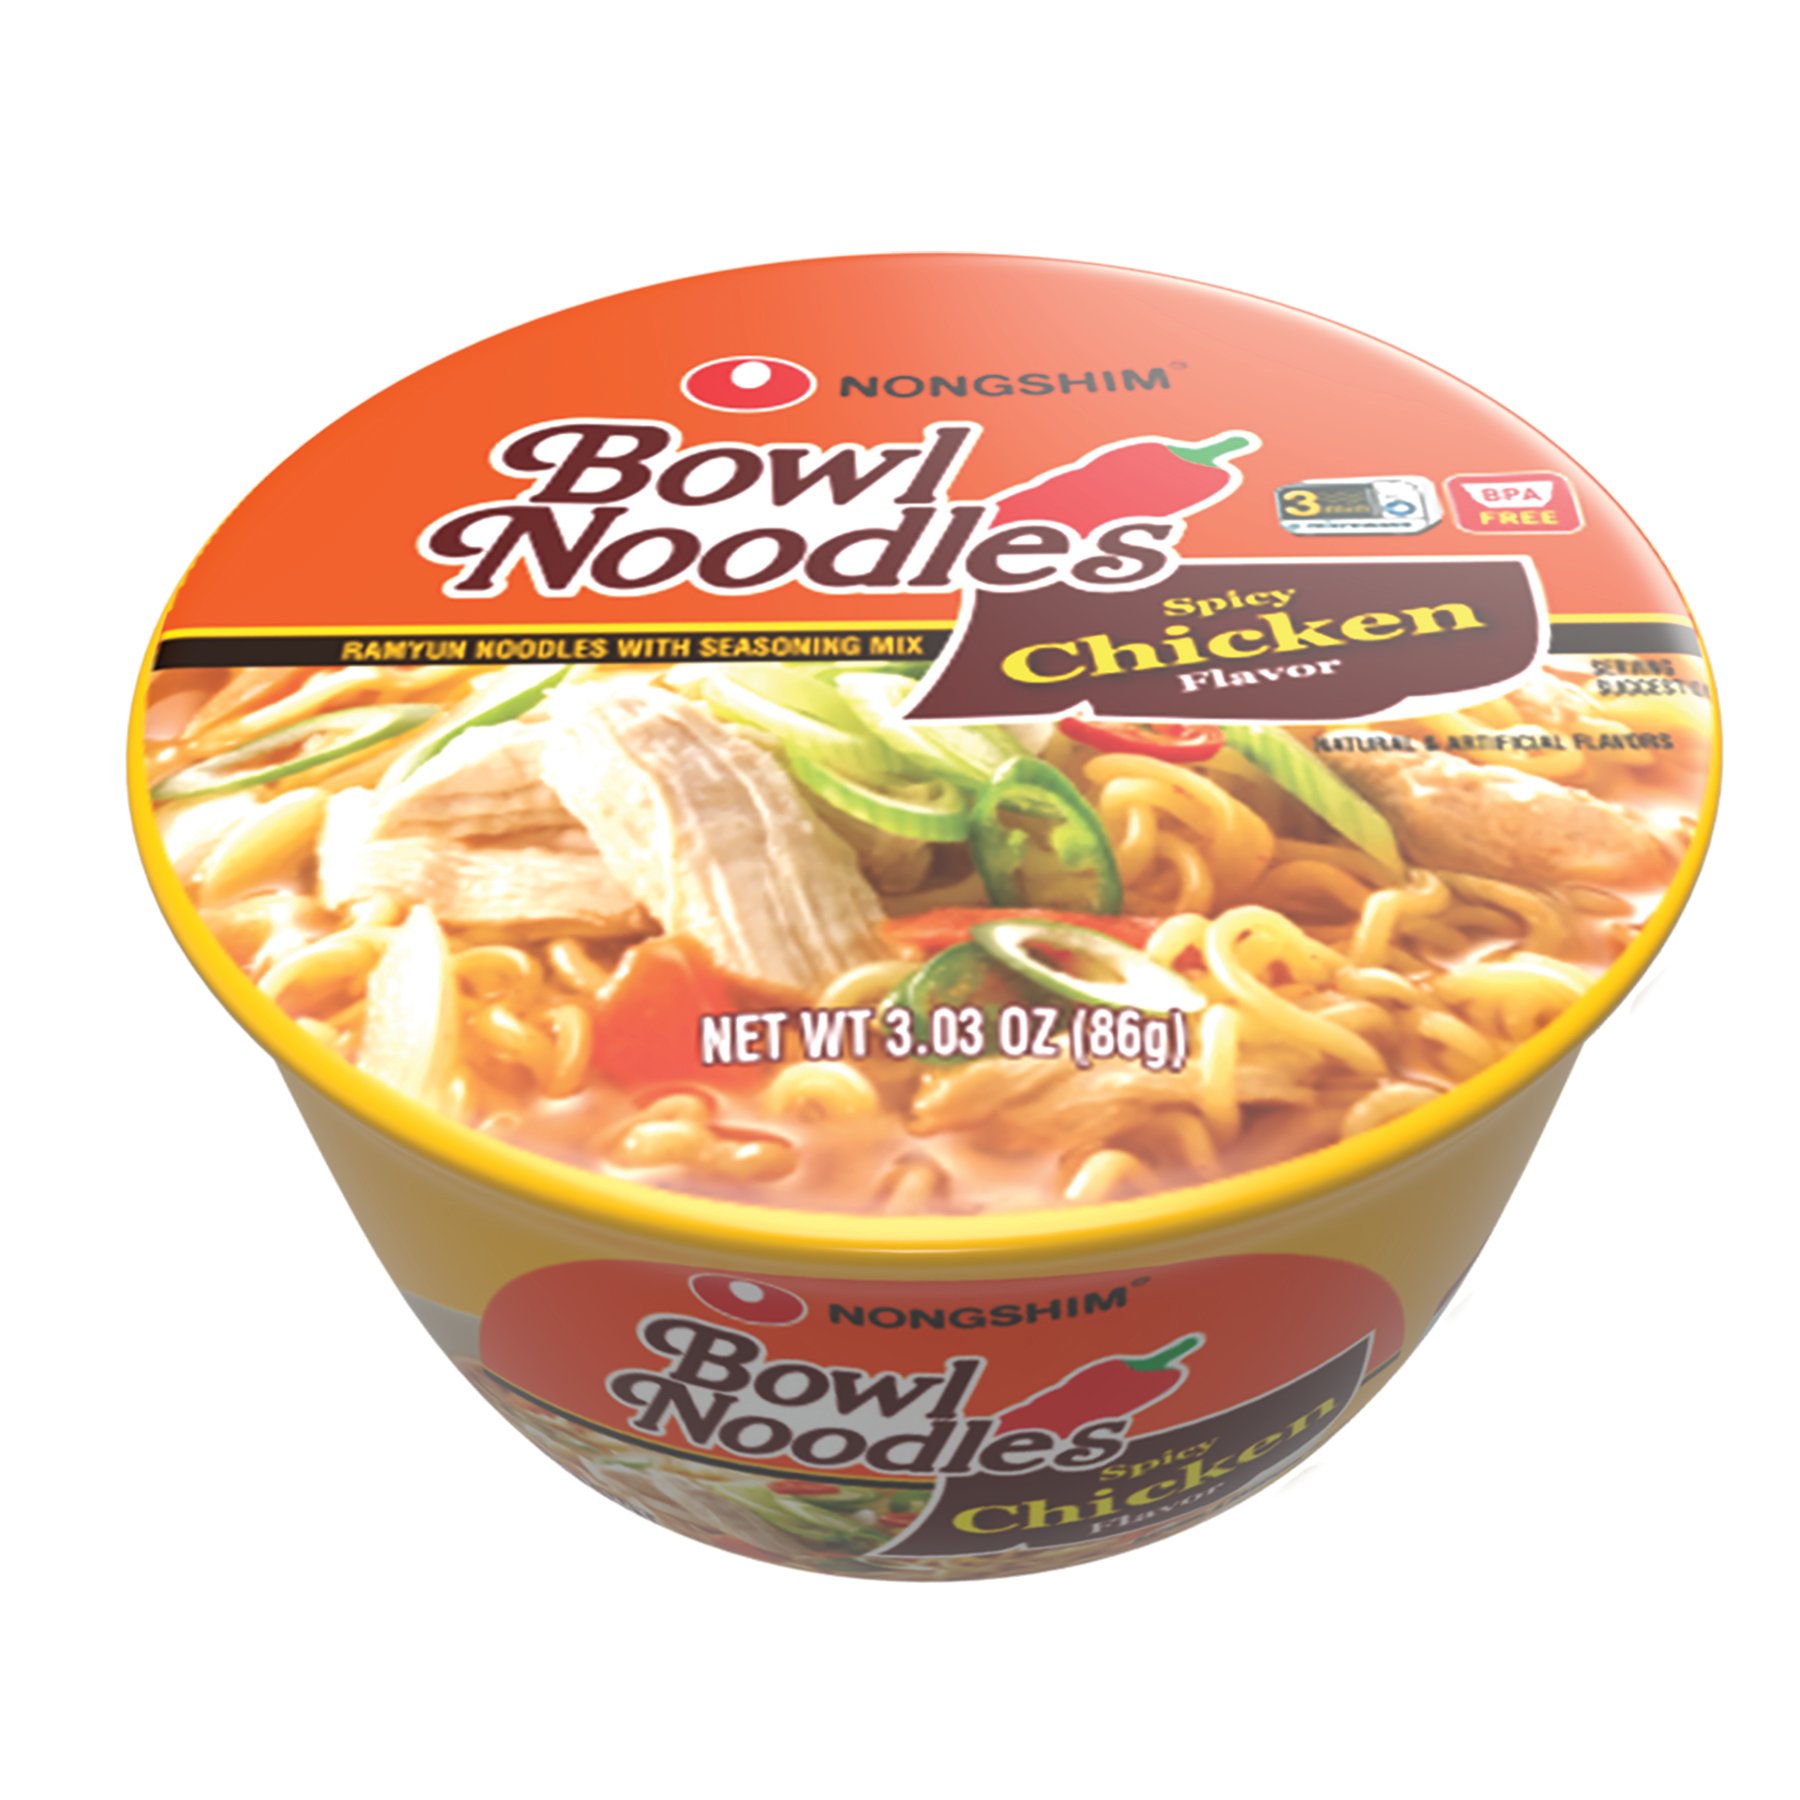 Nongshim Noodle Bowl: Spicy Chicken